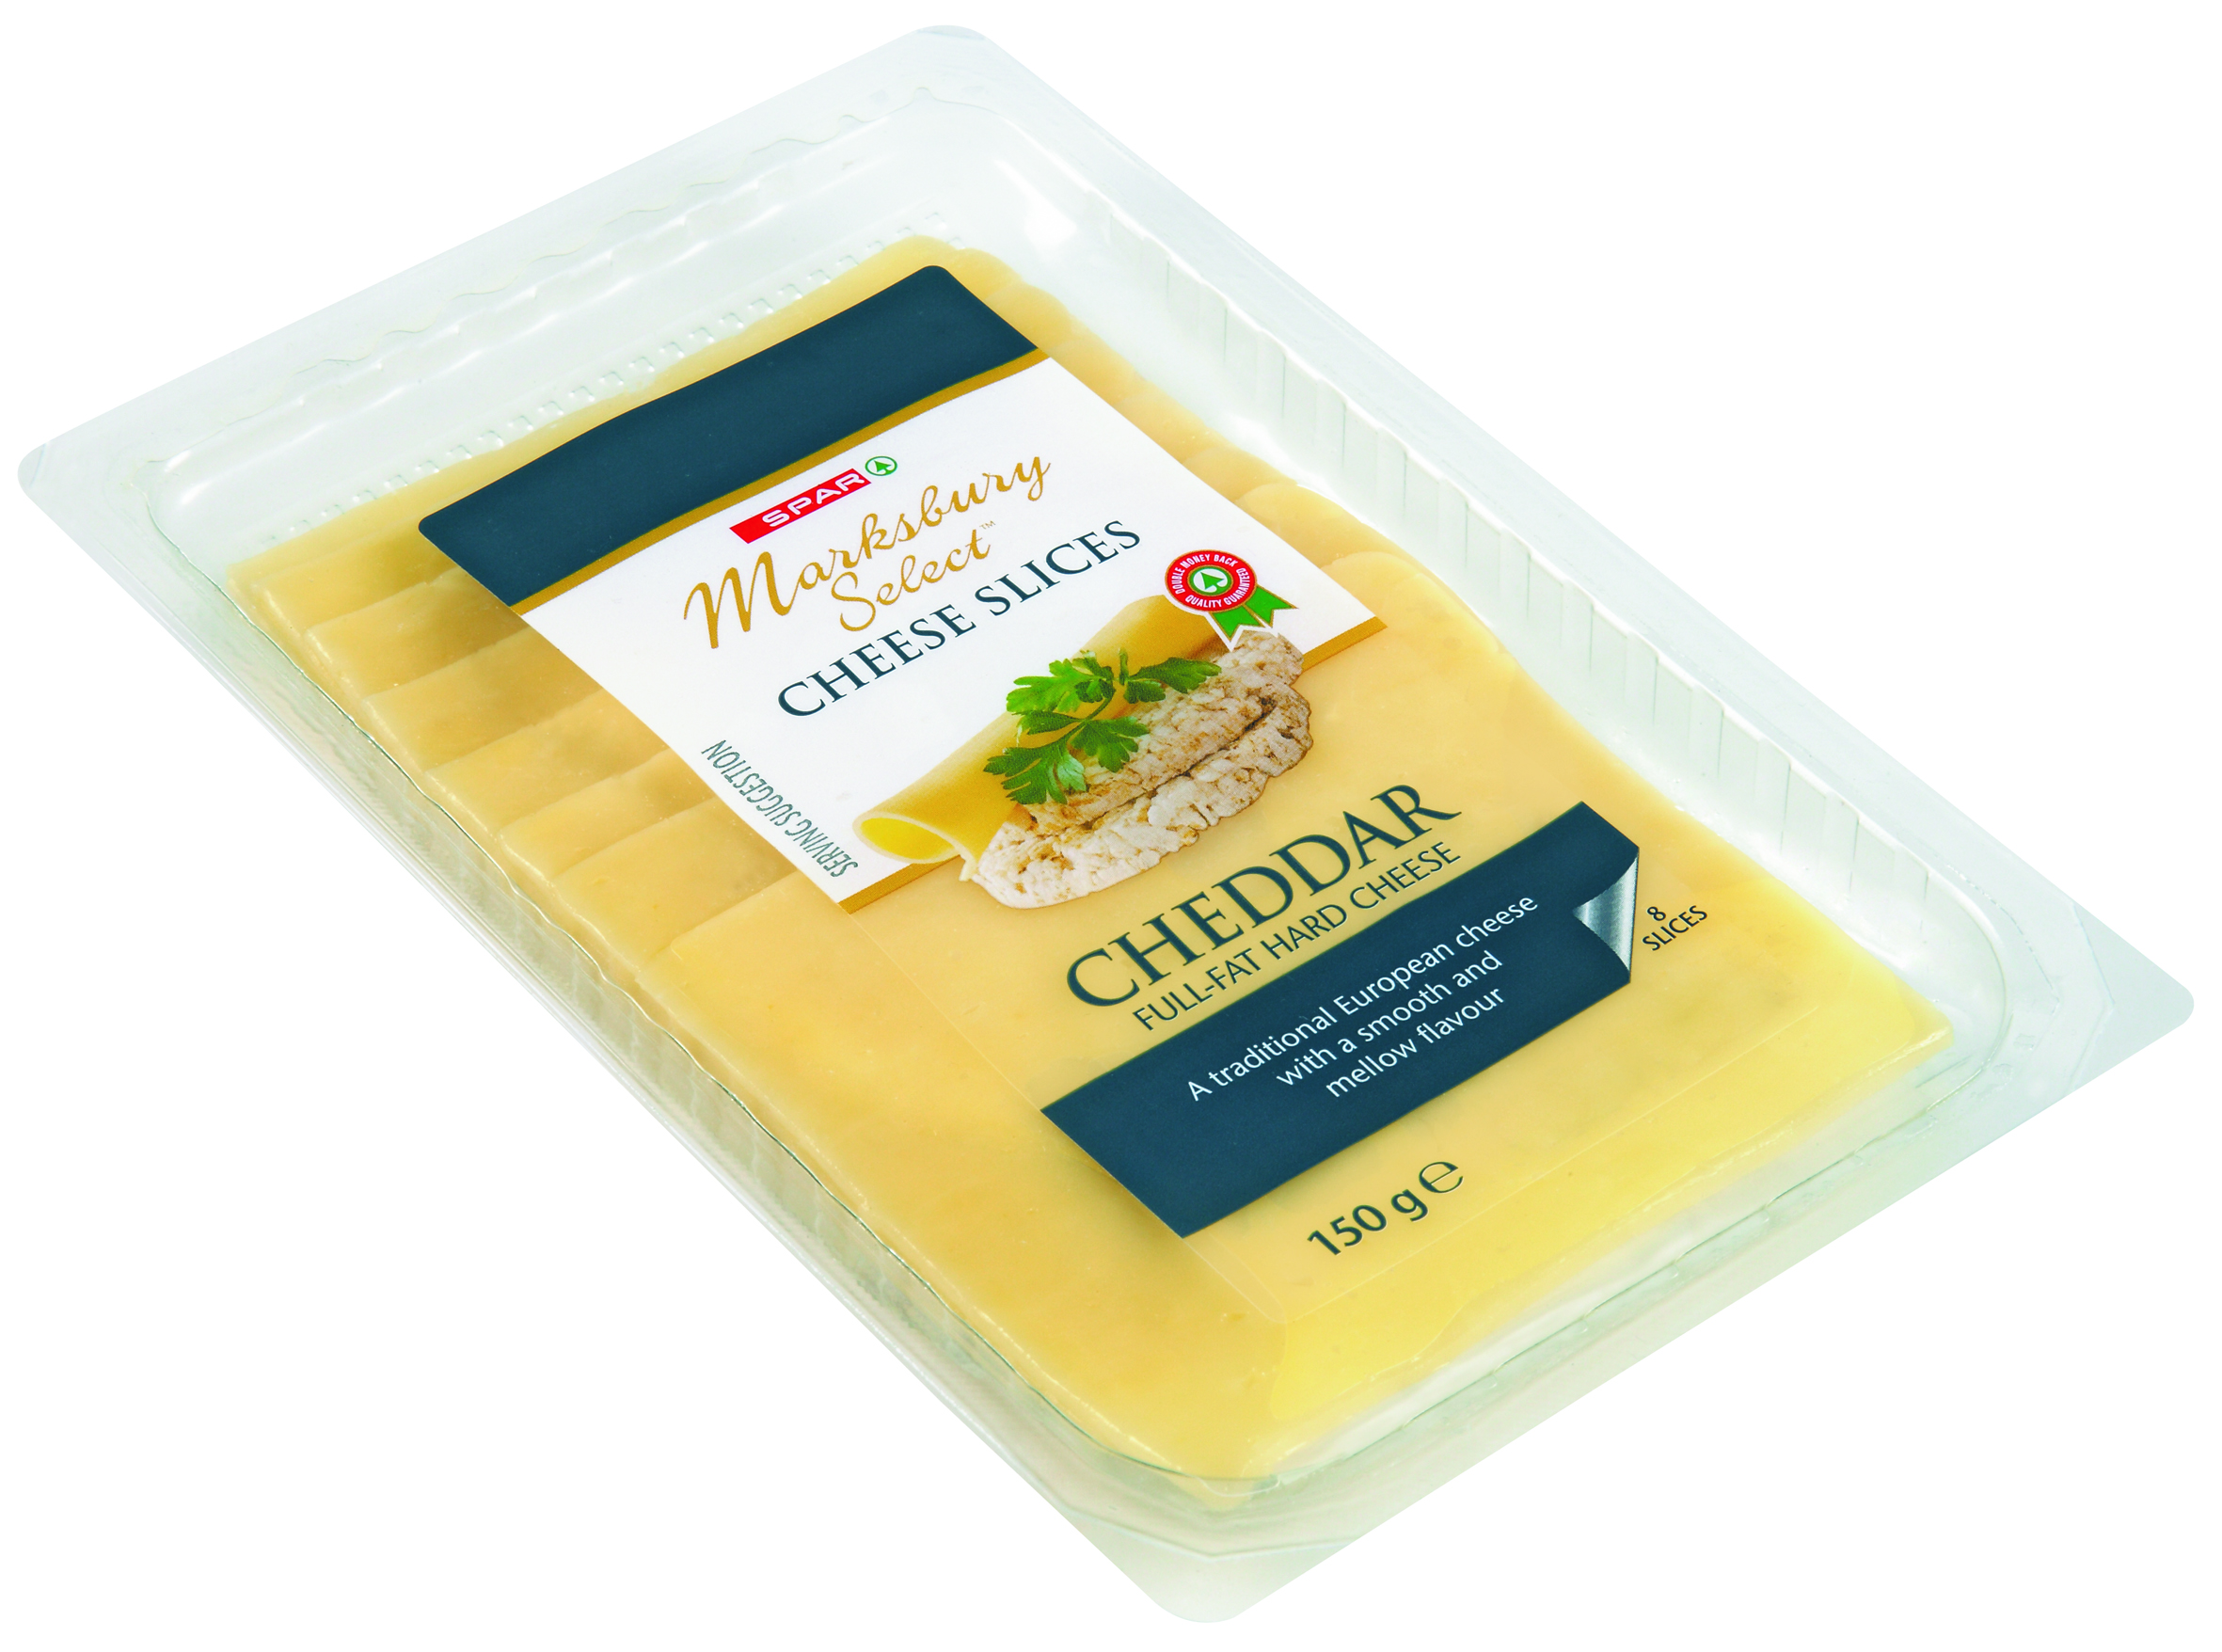 marksbury select cheese slices cheddar